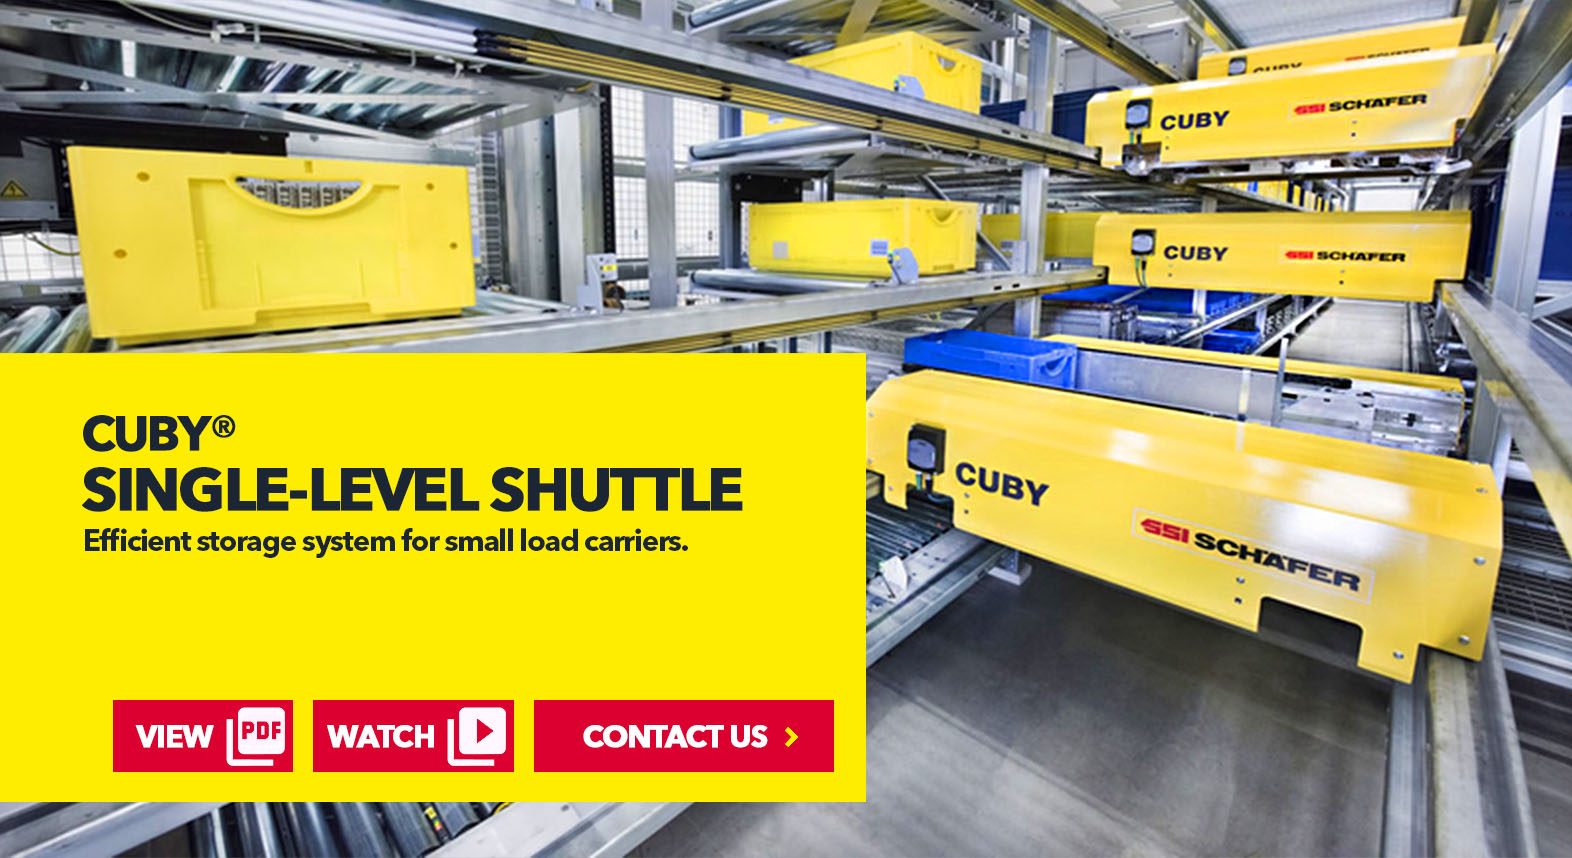 CUBY® Single-Level Shuttle System by SSI Schaefer USA Download Guide, Watch Video, Contact Us. www.schaefershelving.com